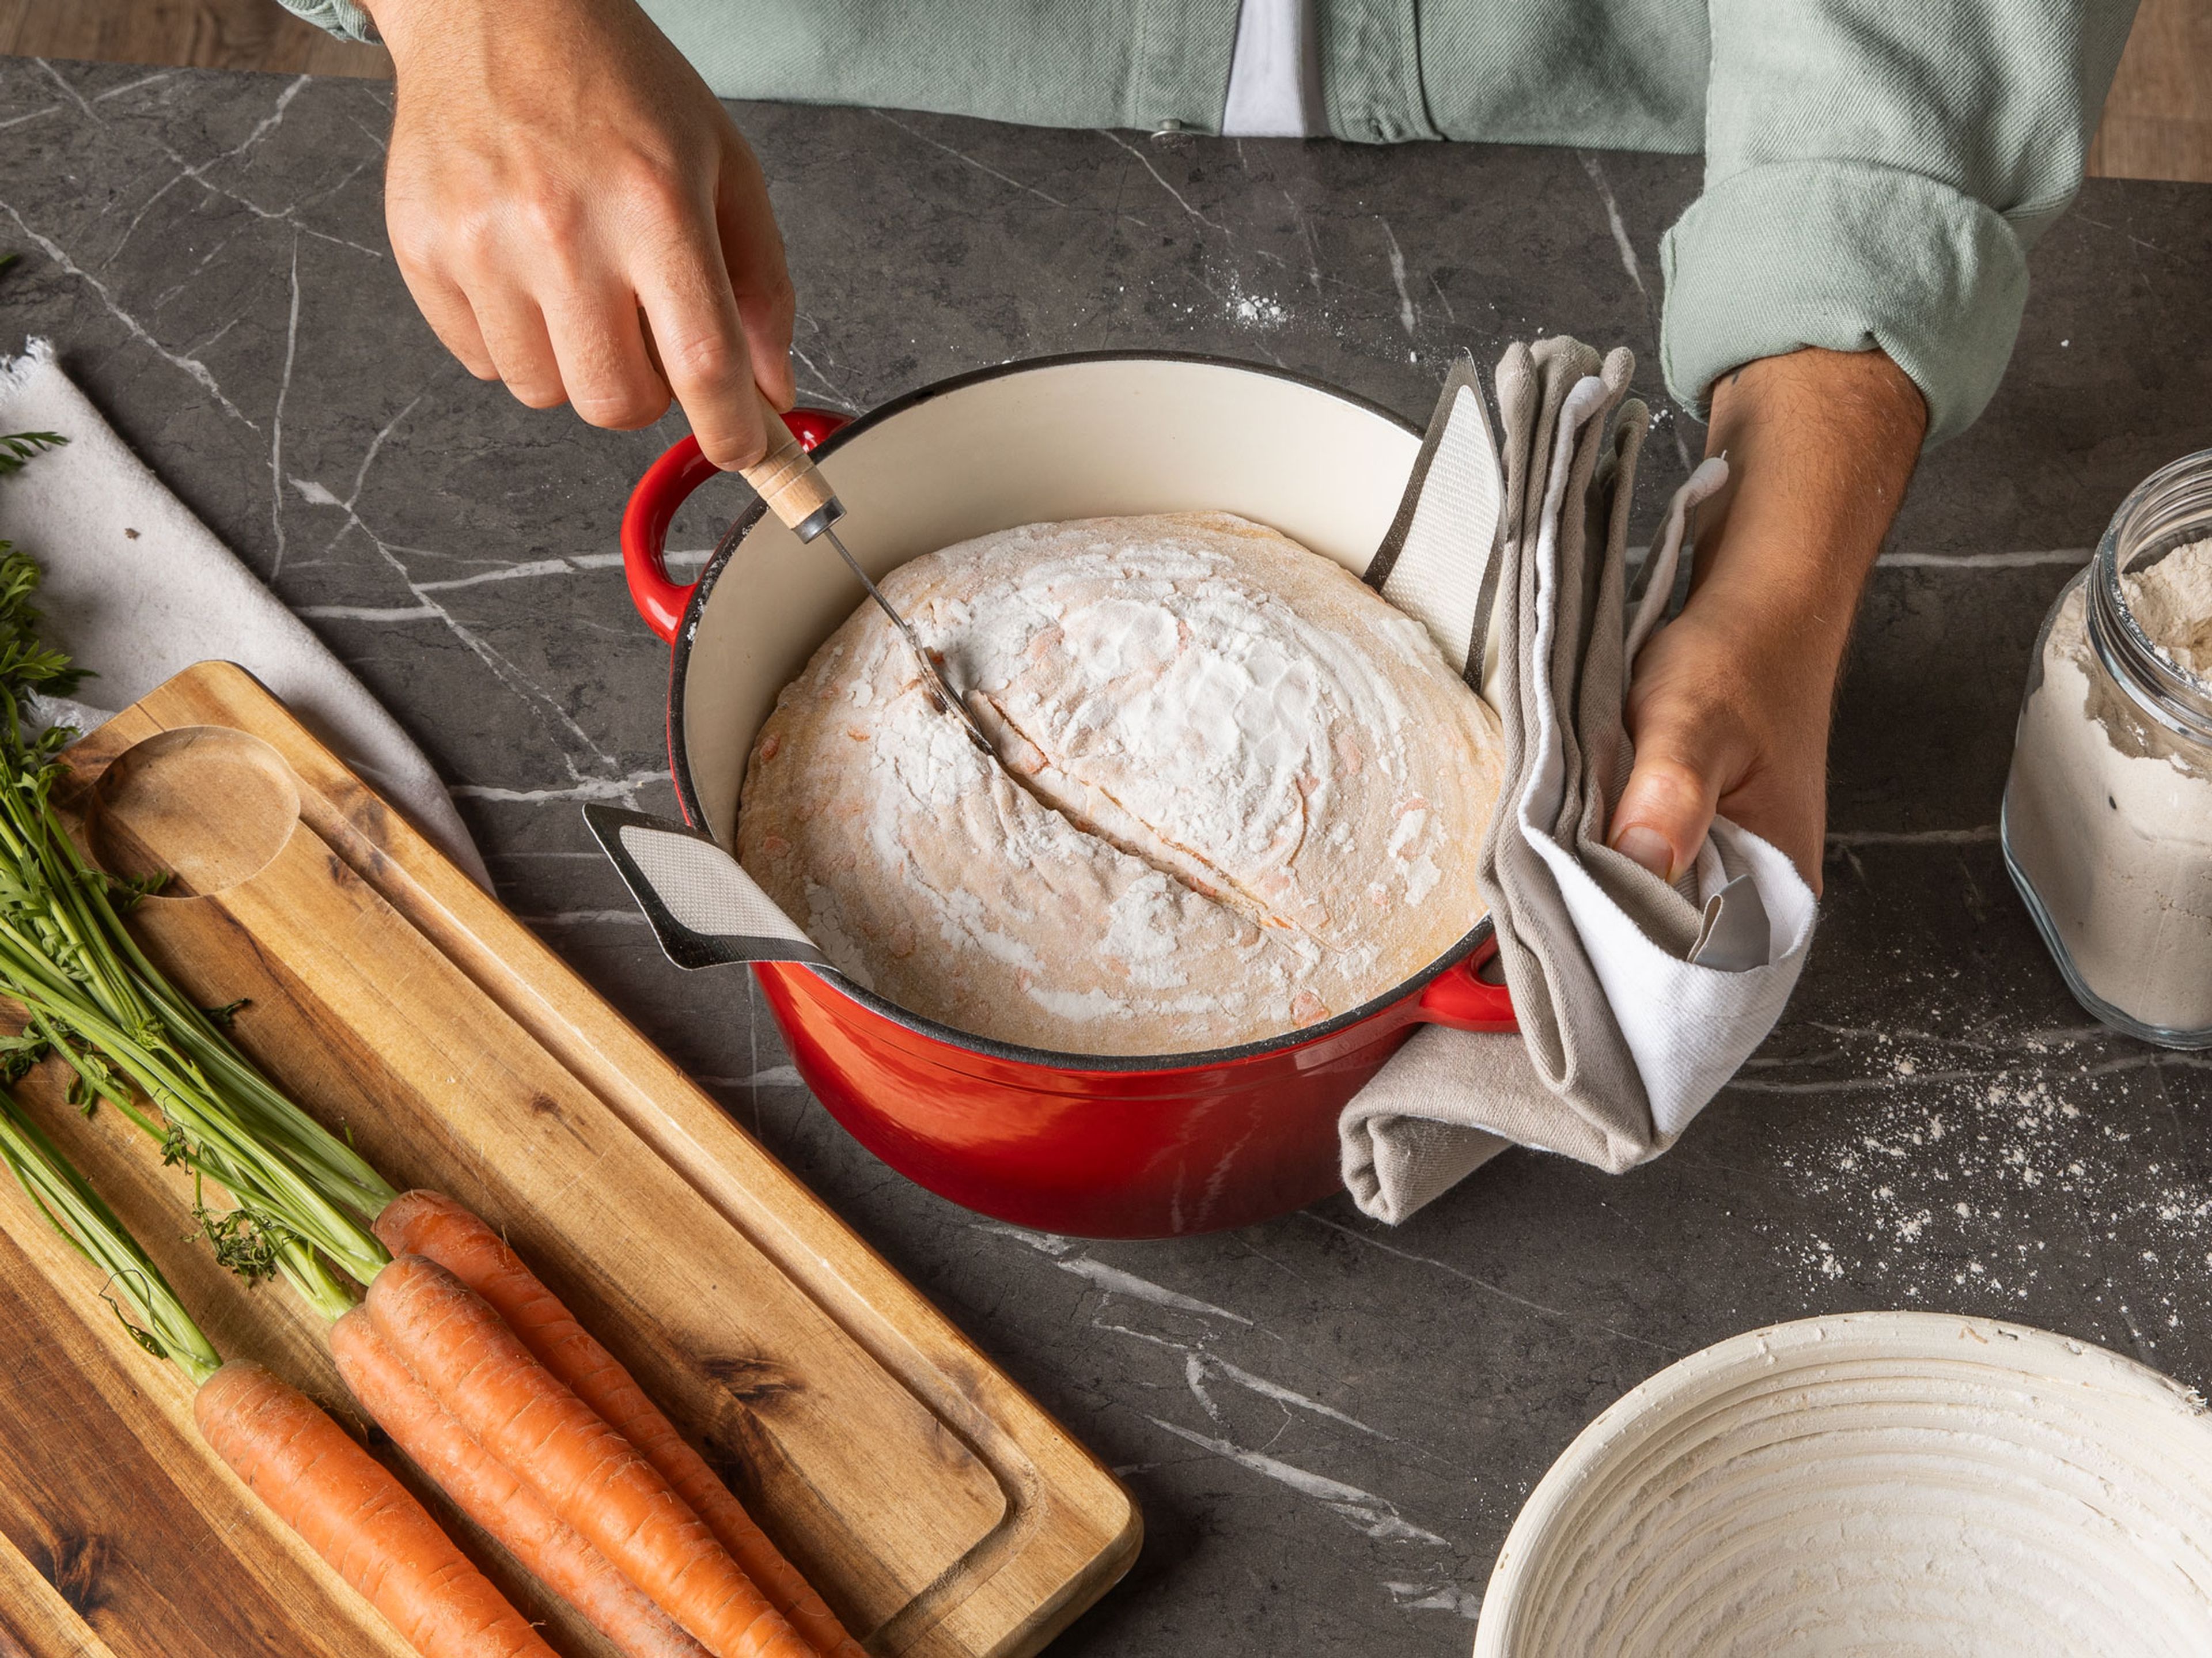 Place a Dutch oven with lid in the oven and preheat to 250°C/480°F. Once preheated, gently flip the dough into the Dutch oven using a sling. Score the top with a sharp knife, put the Dutch oven lid back on and transfer to the middle rack of the oven. Allow to bake for 30 min. Then, reduce the temperature to 220°C/430°F, remove the lid to allow the bread to bake for another 15 min. until the top is crunchy and golden brown. Remove from the oven and allow to cool.